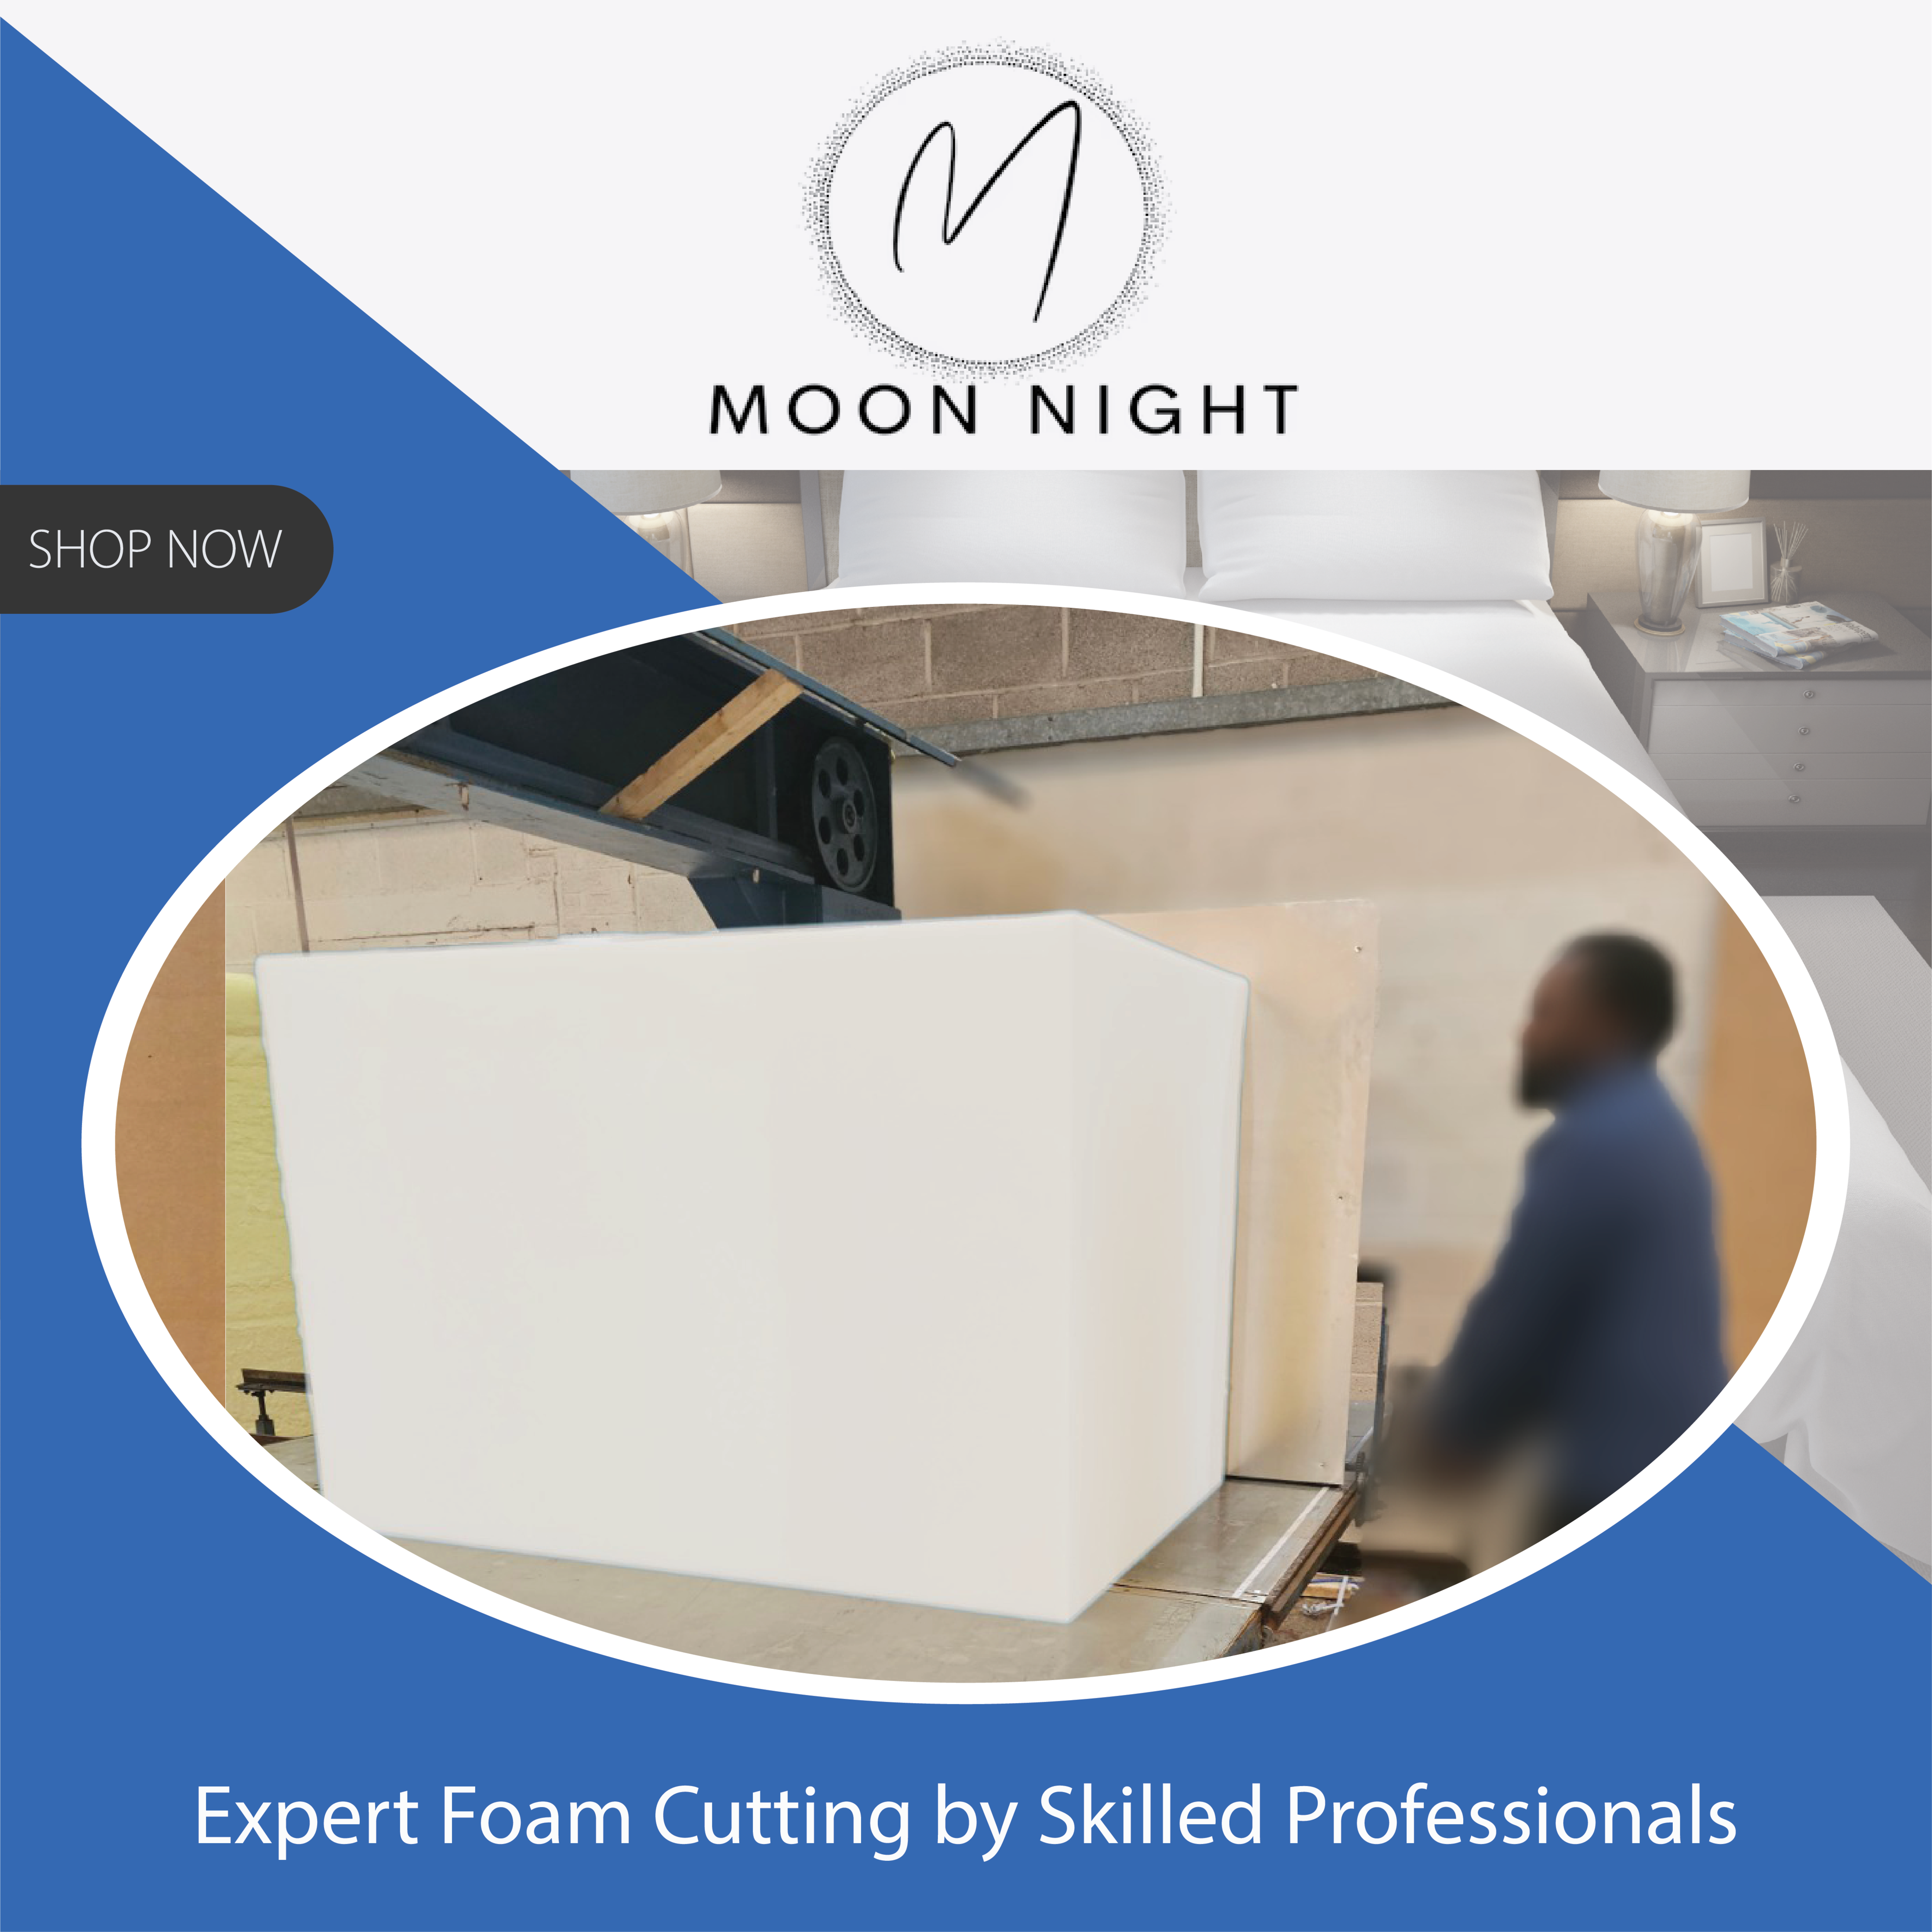 Moon Night High Density Upholstery Foam Sheet For Cushions, Sofa, Beds, Seats, Campervans, Indoor/Outdoor Padding